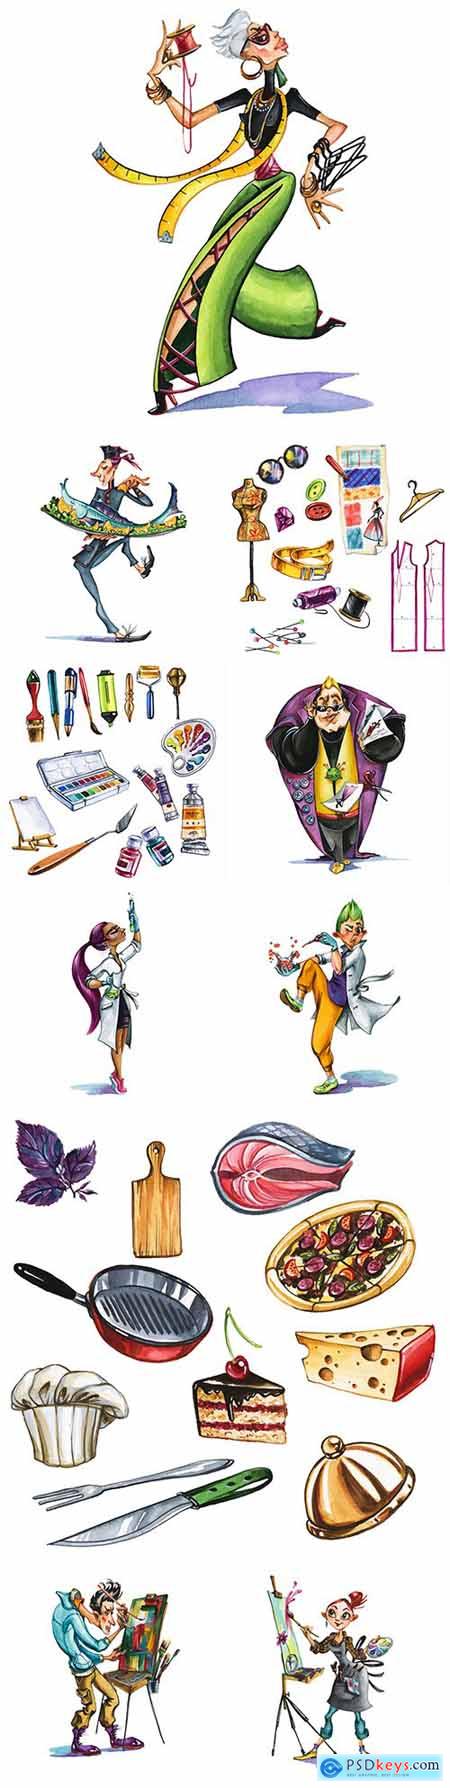 Cartoon characters of different professions and subjects watercolor illustrations